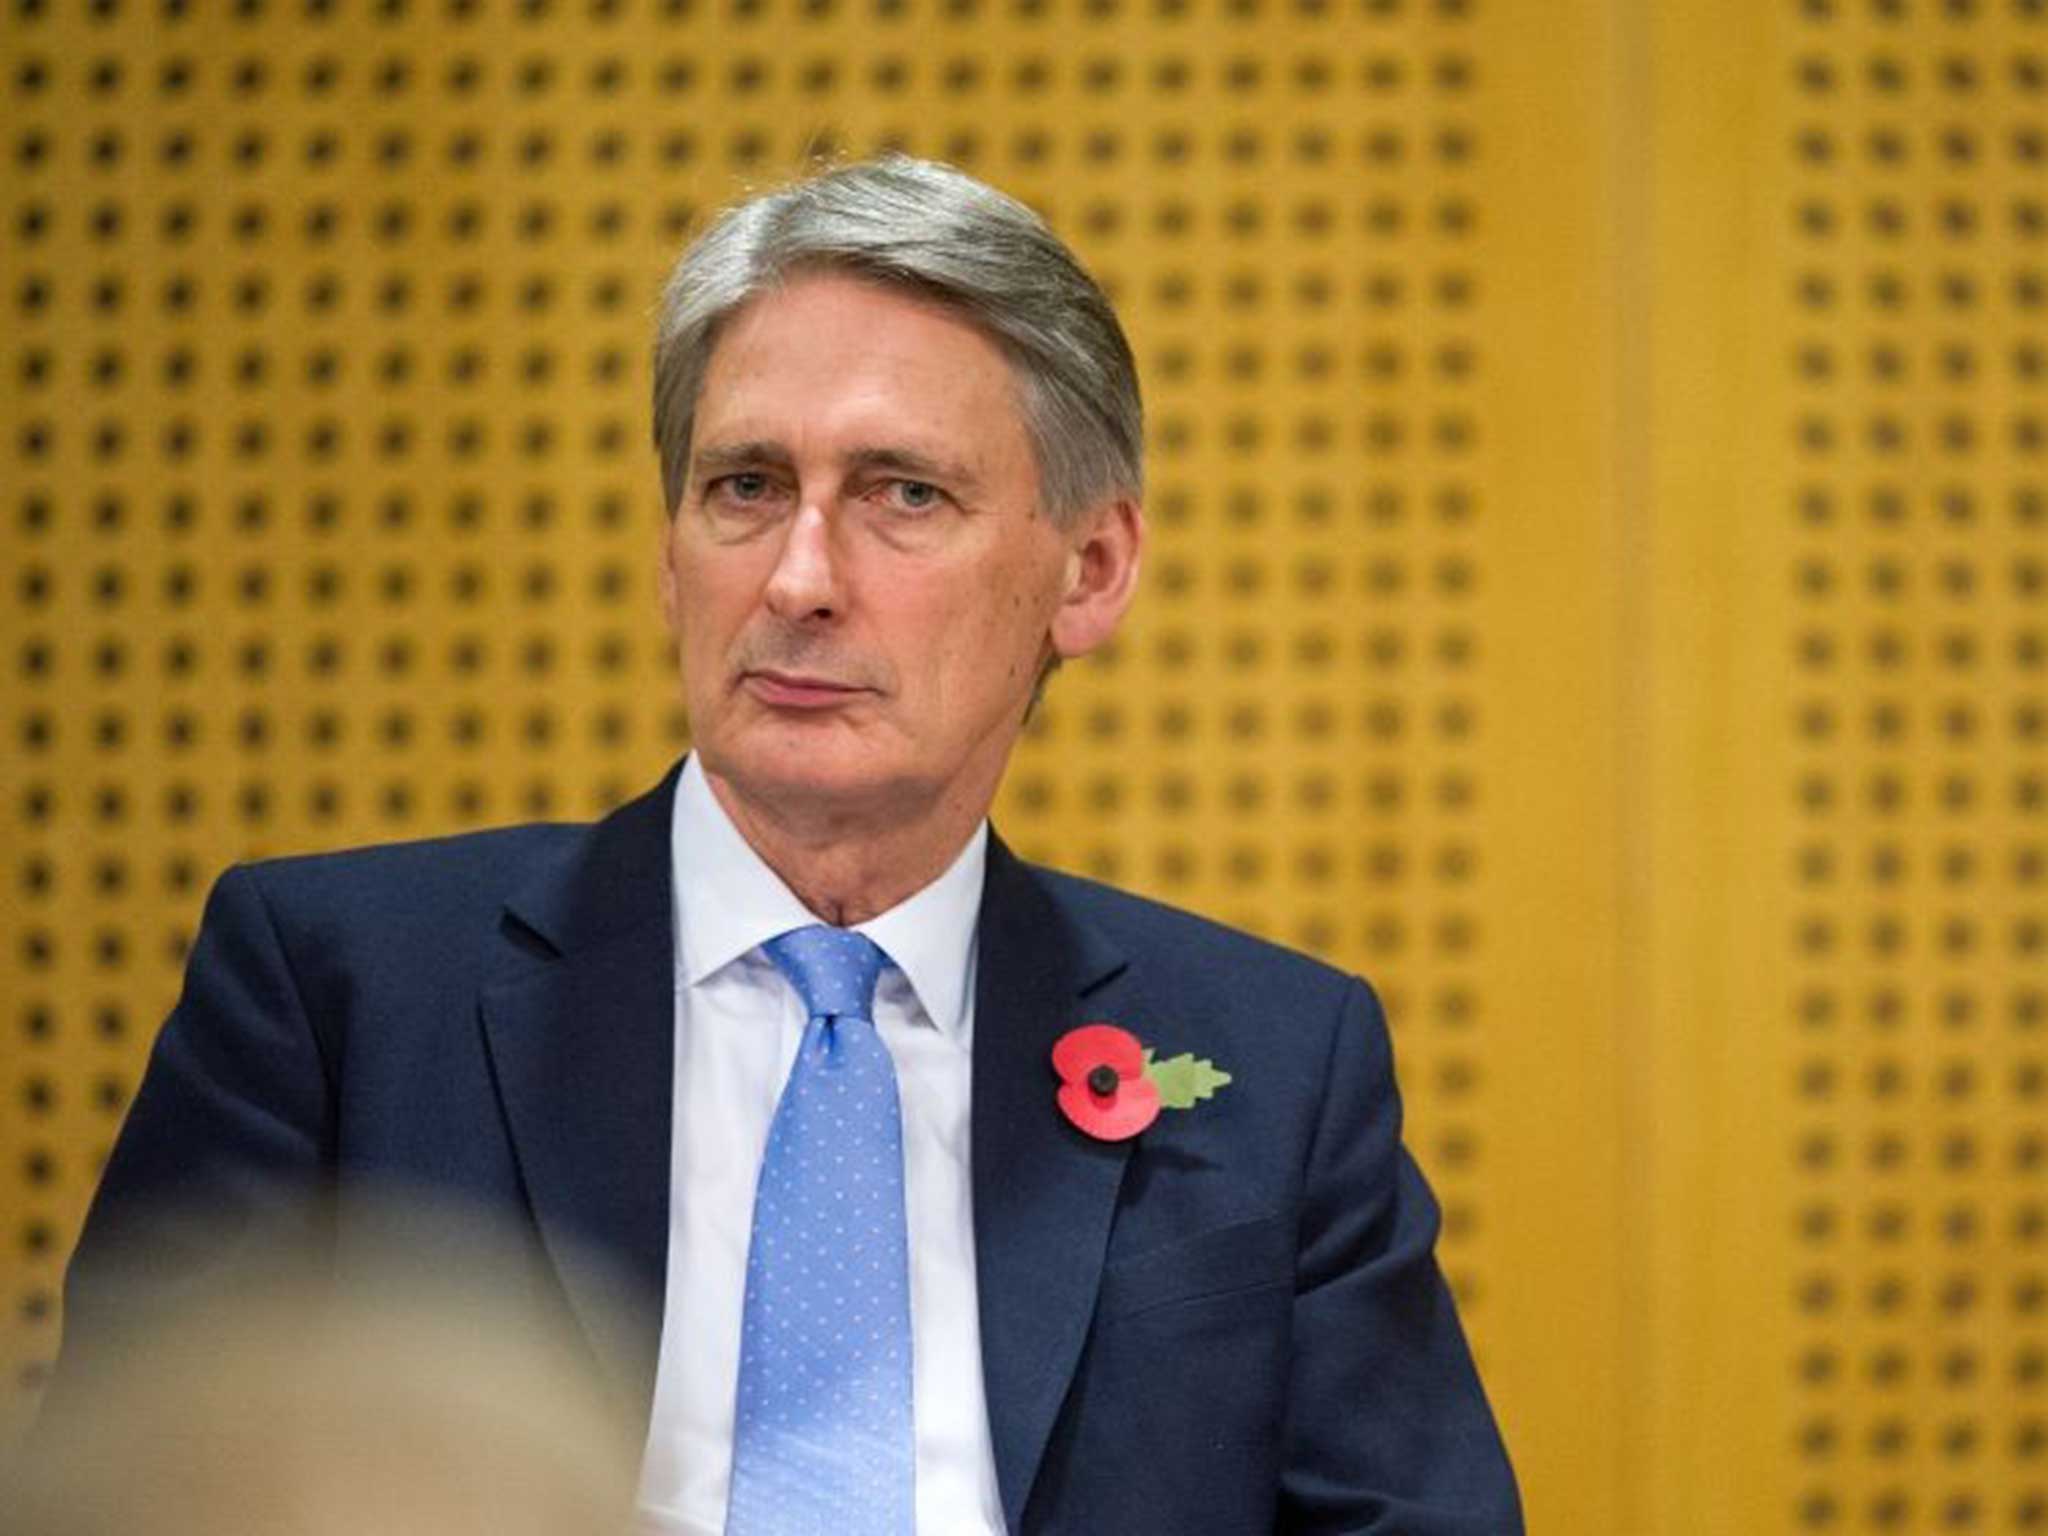 The UK should be prepared to “walk away” from the European Union, according to Philip Hammond